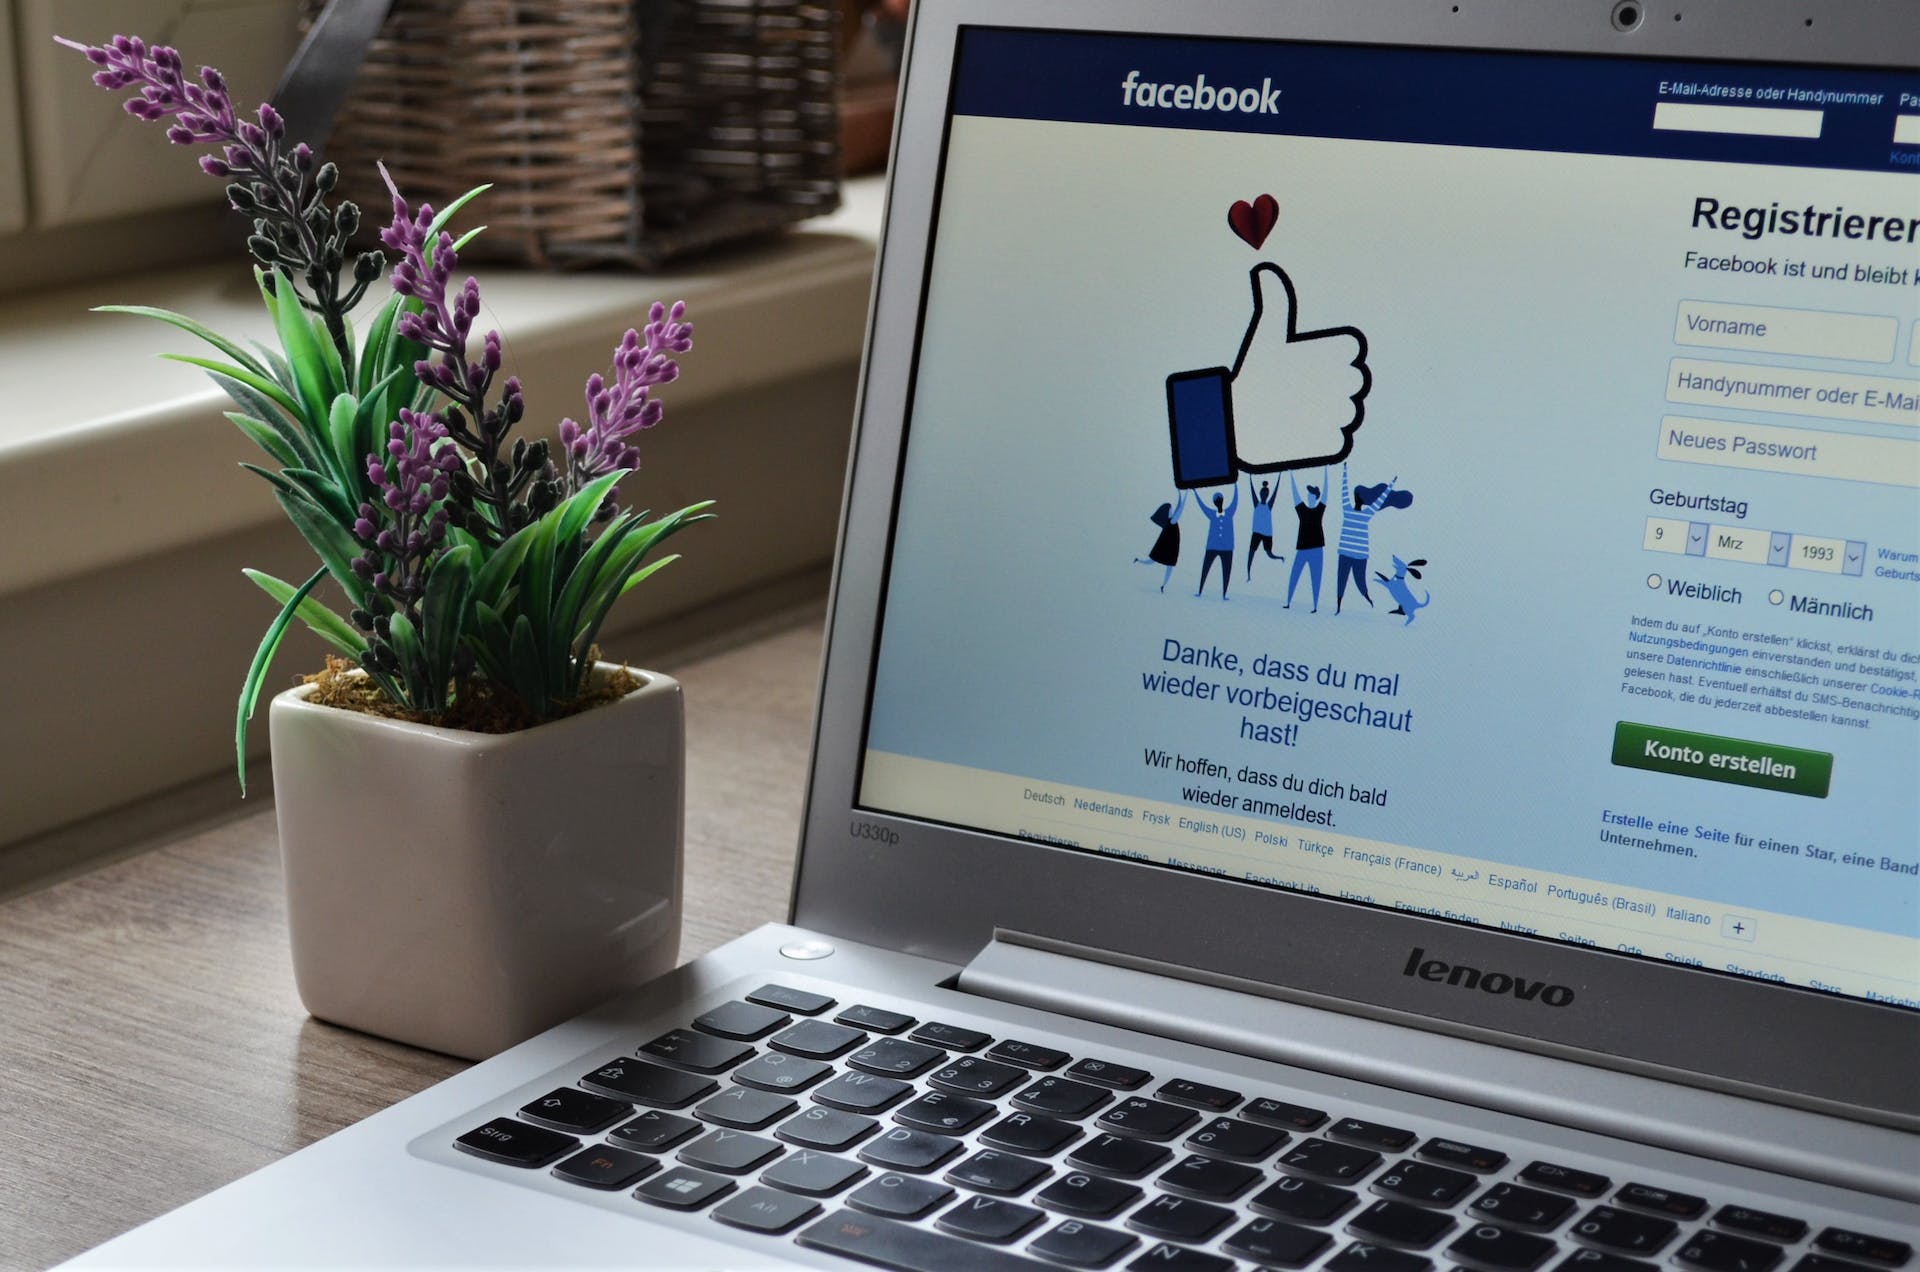 How to turn your Facebook into a business account